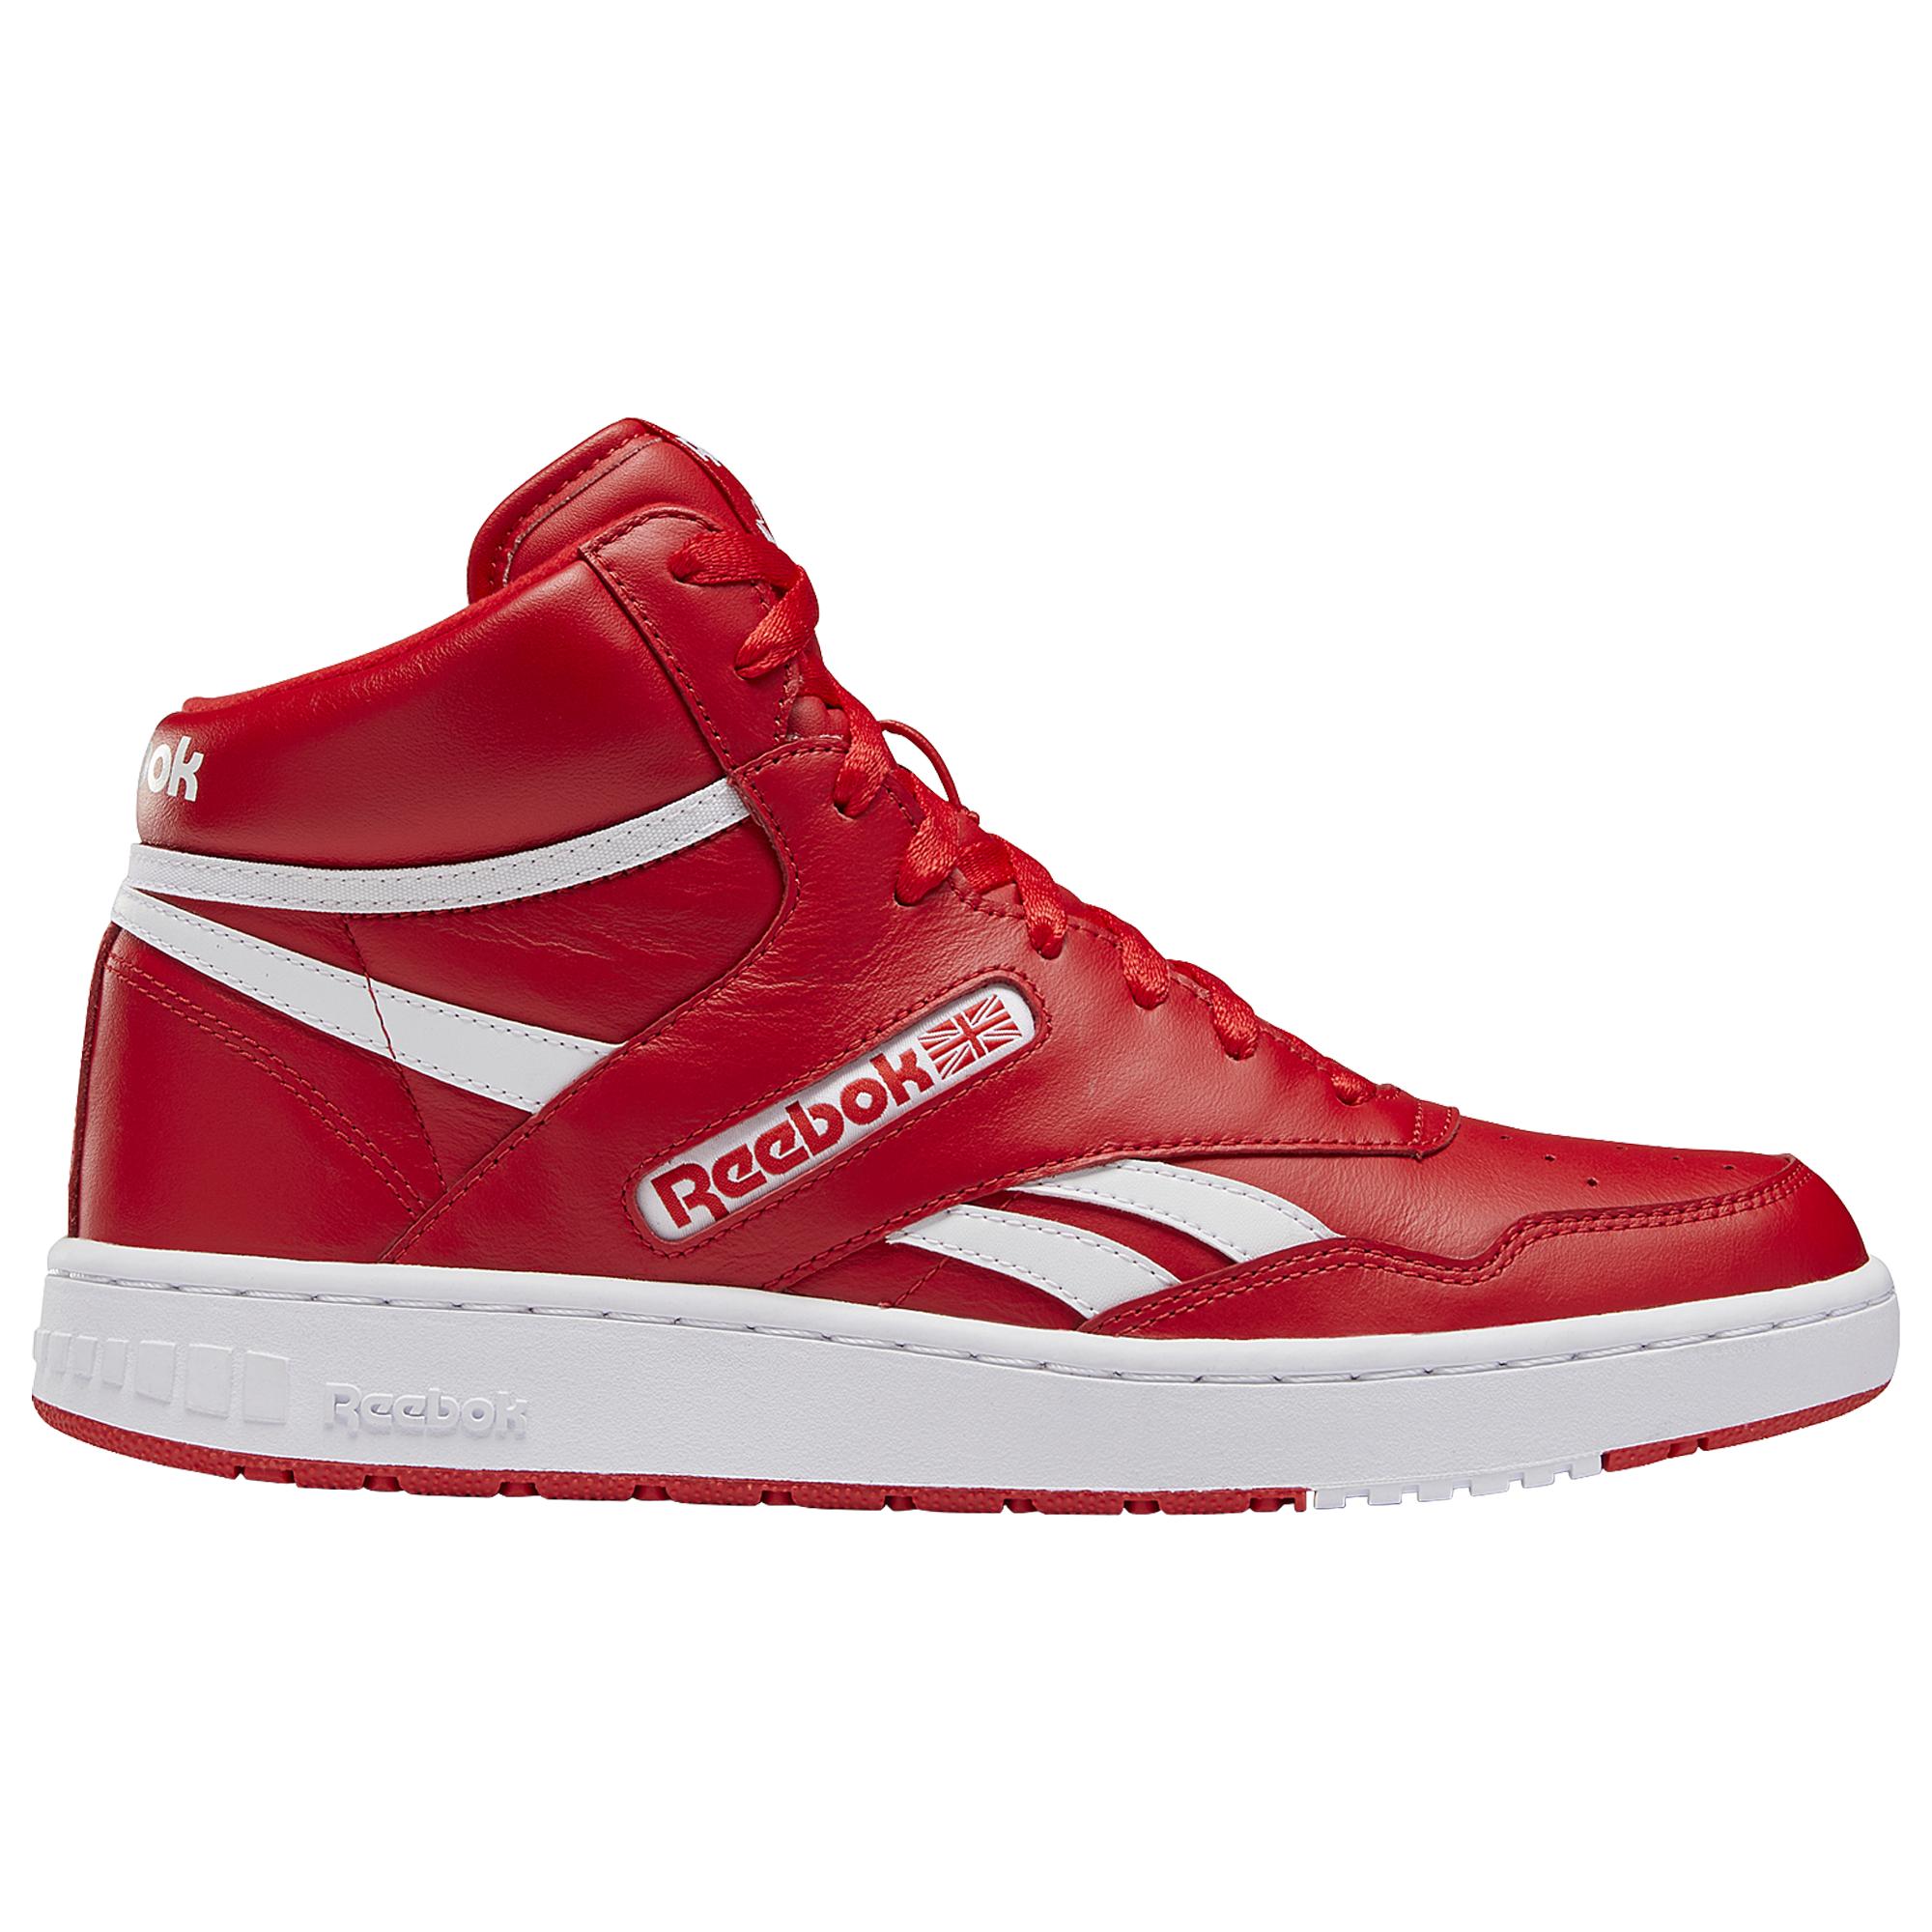 Reebok Leather Bb4600 Basketball Shoes in Red/White (Red) for Men ...